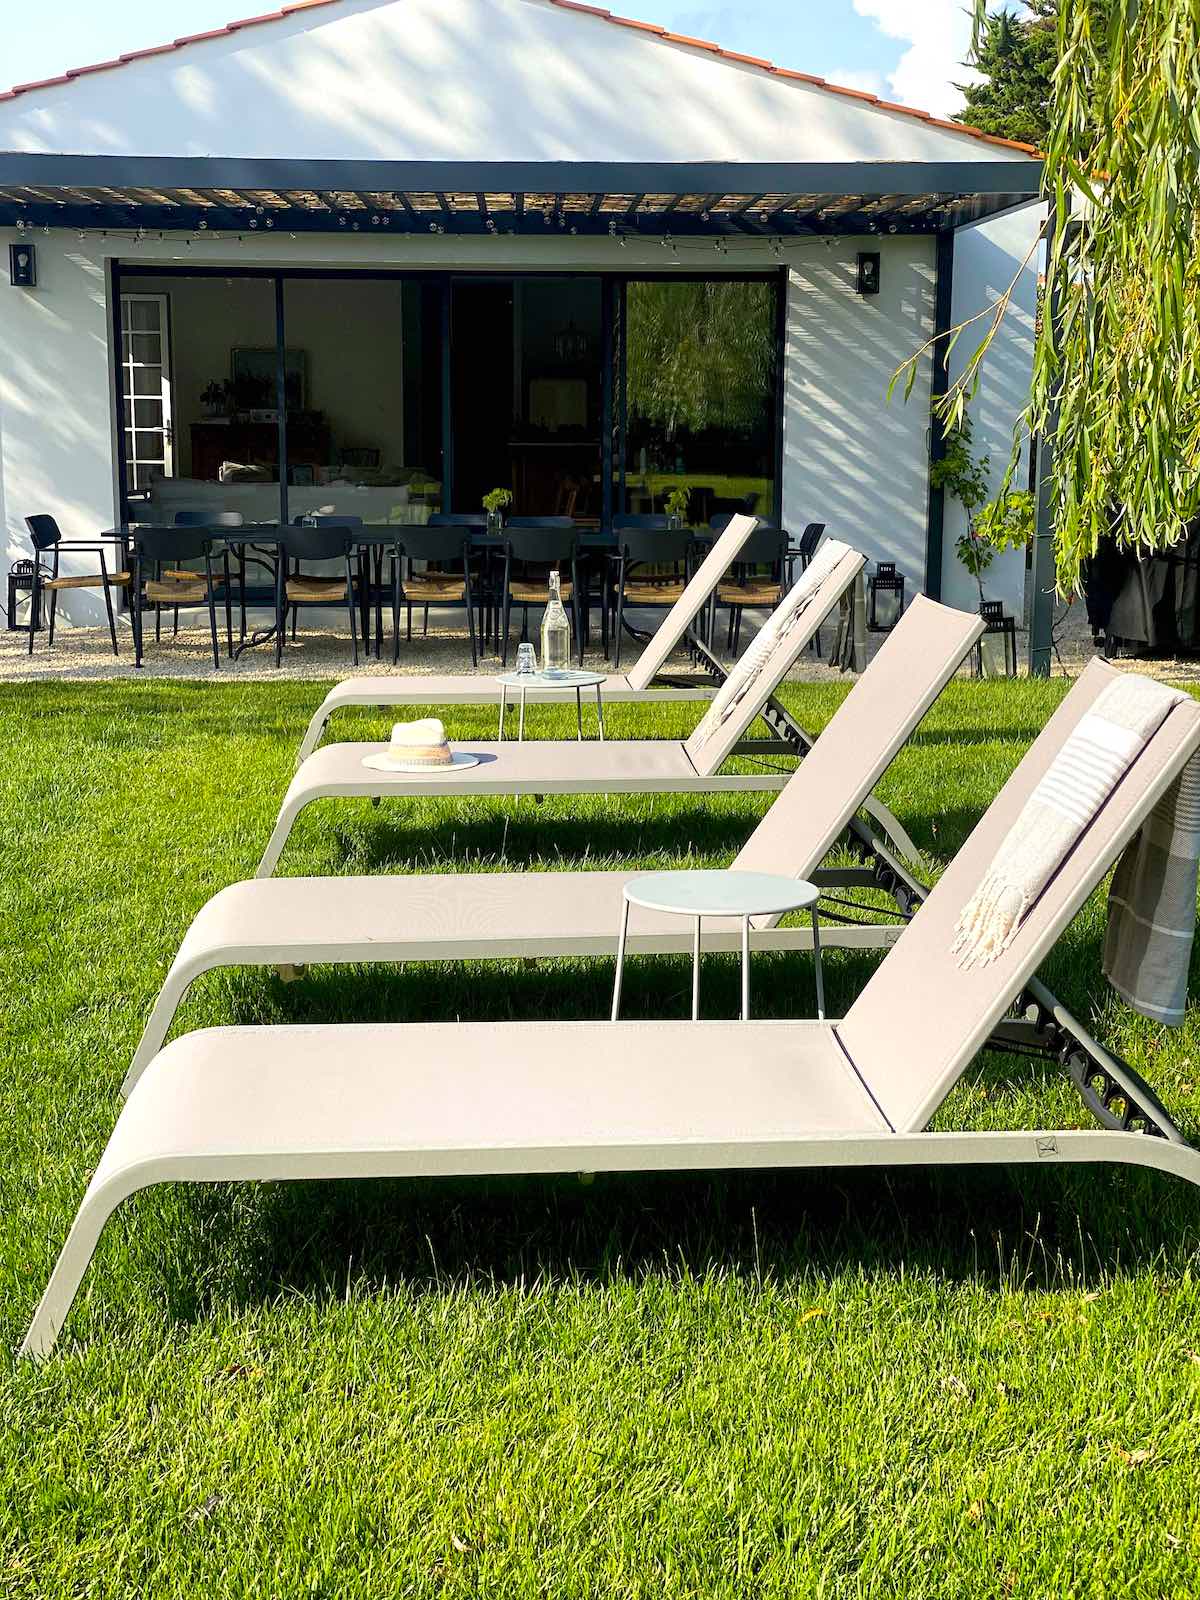 Lounge Chairs lined up with house in the background